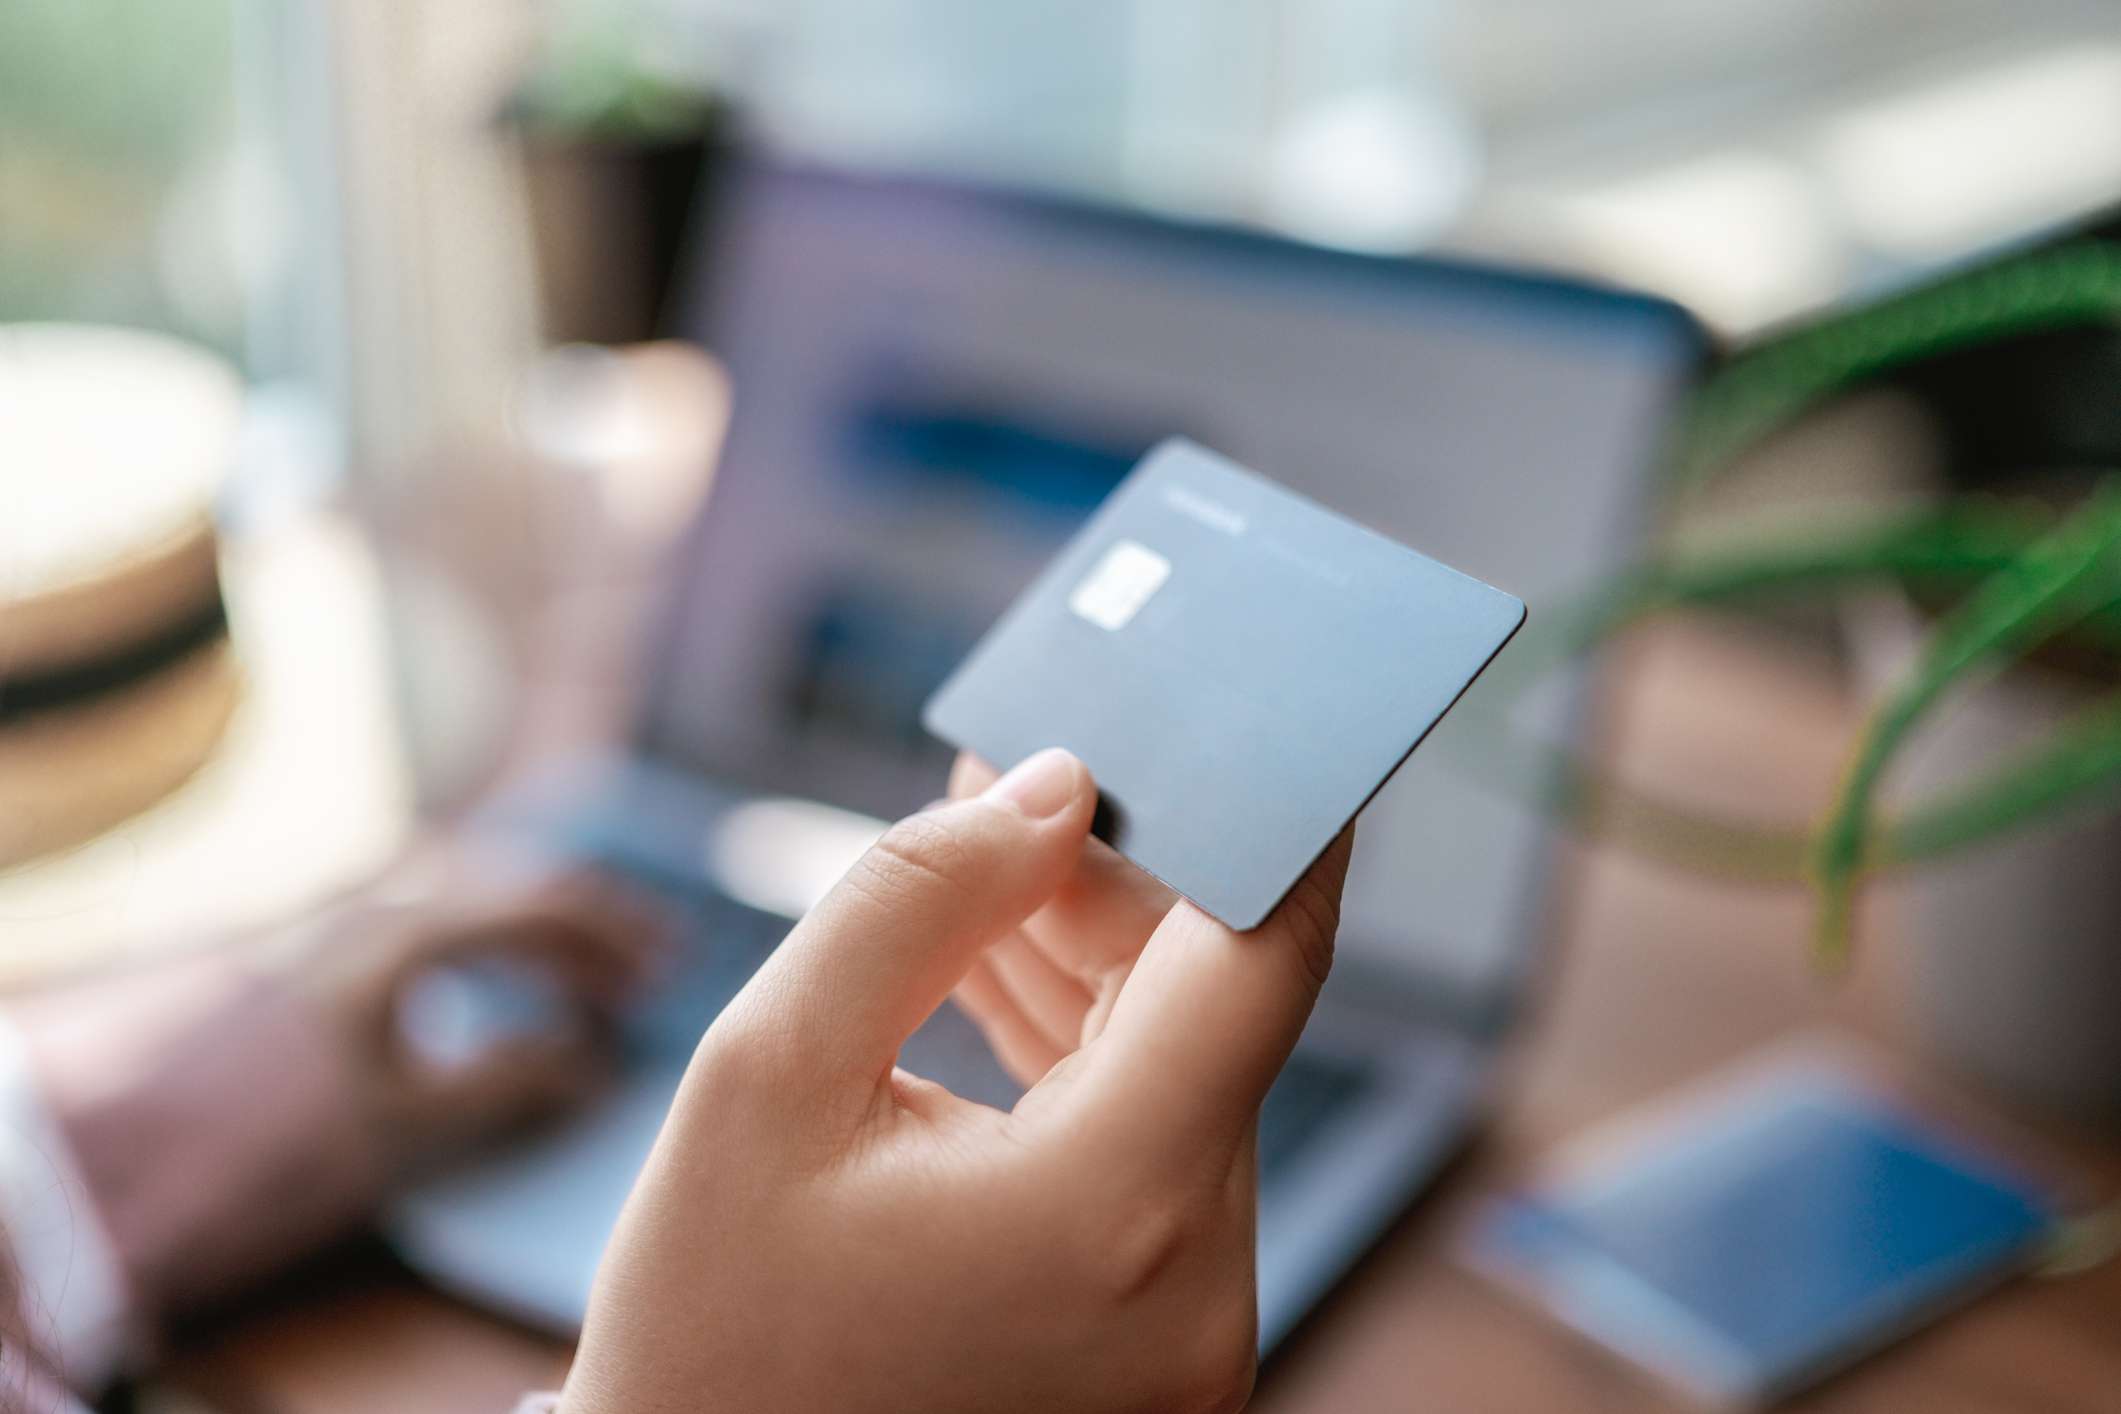 A person uses a credit card to buy something online. Credit card in hand close up